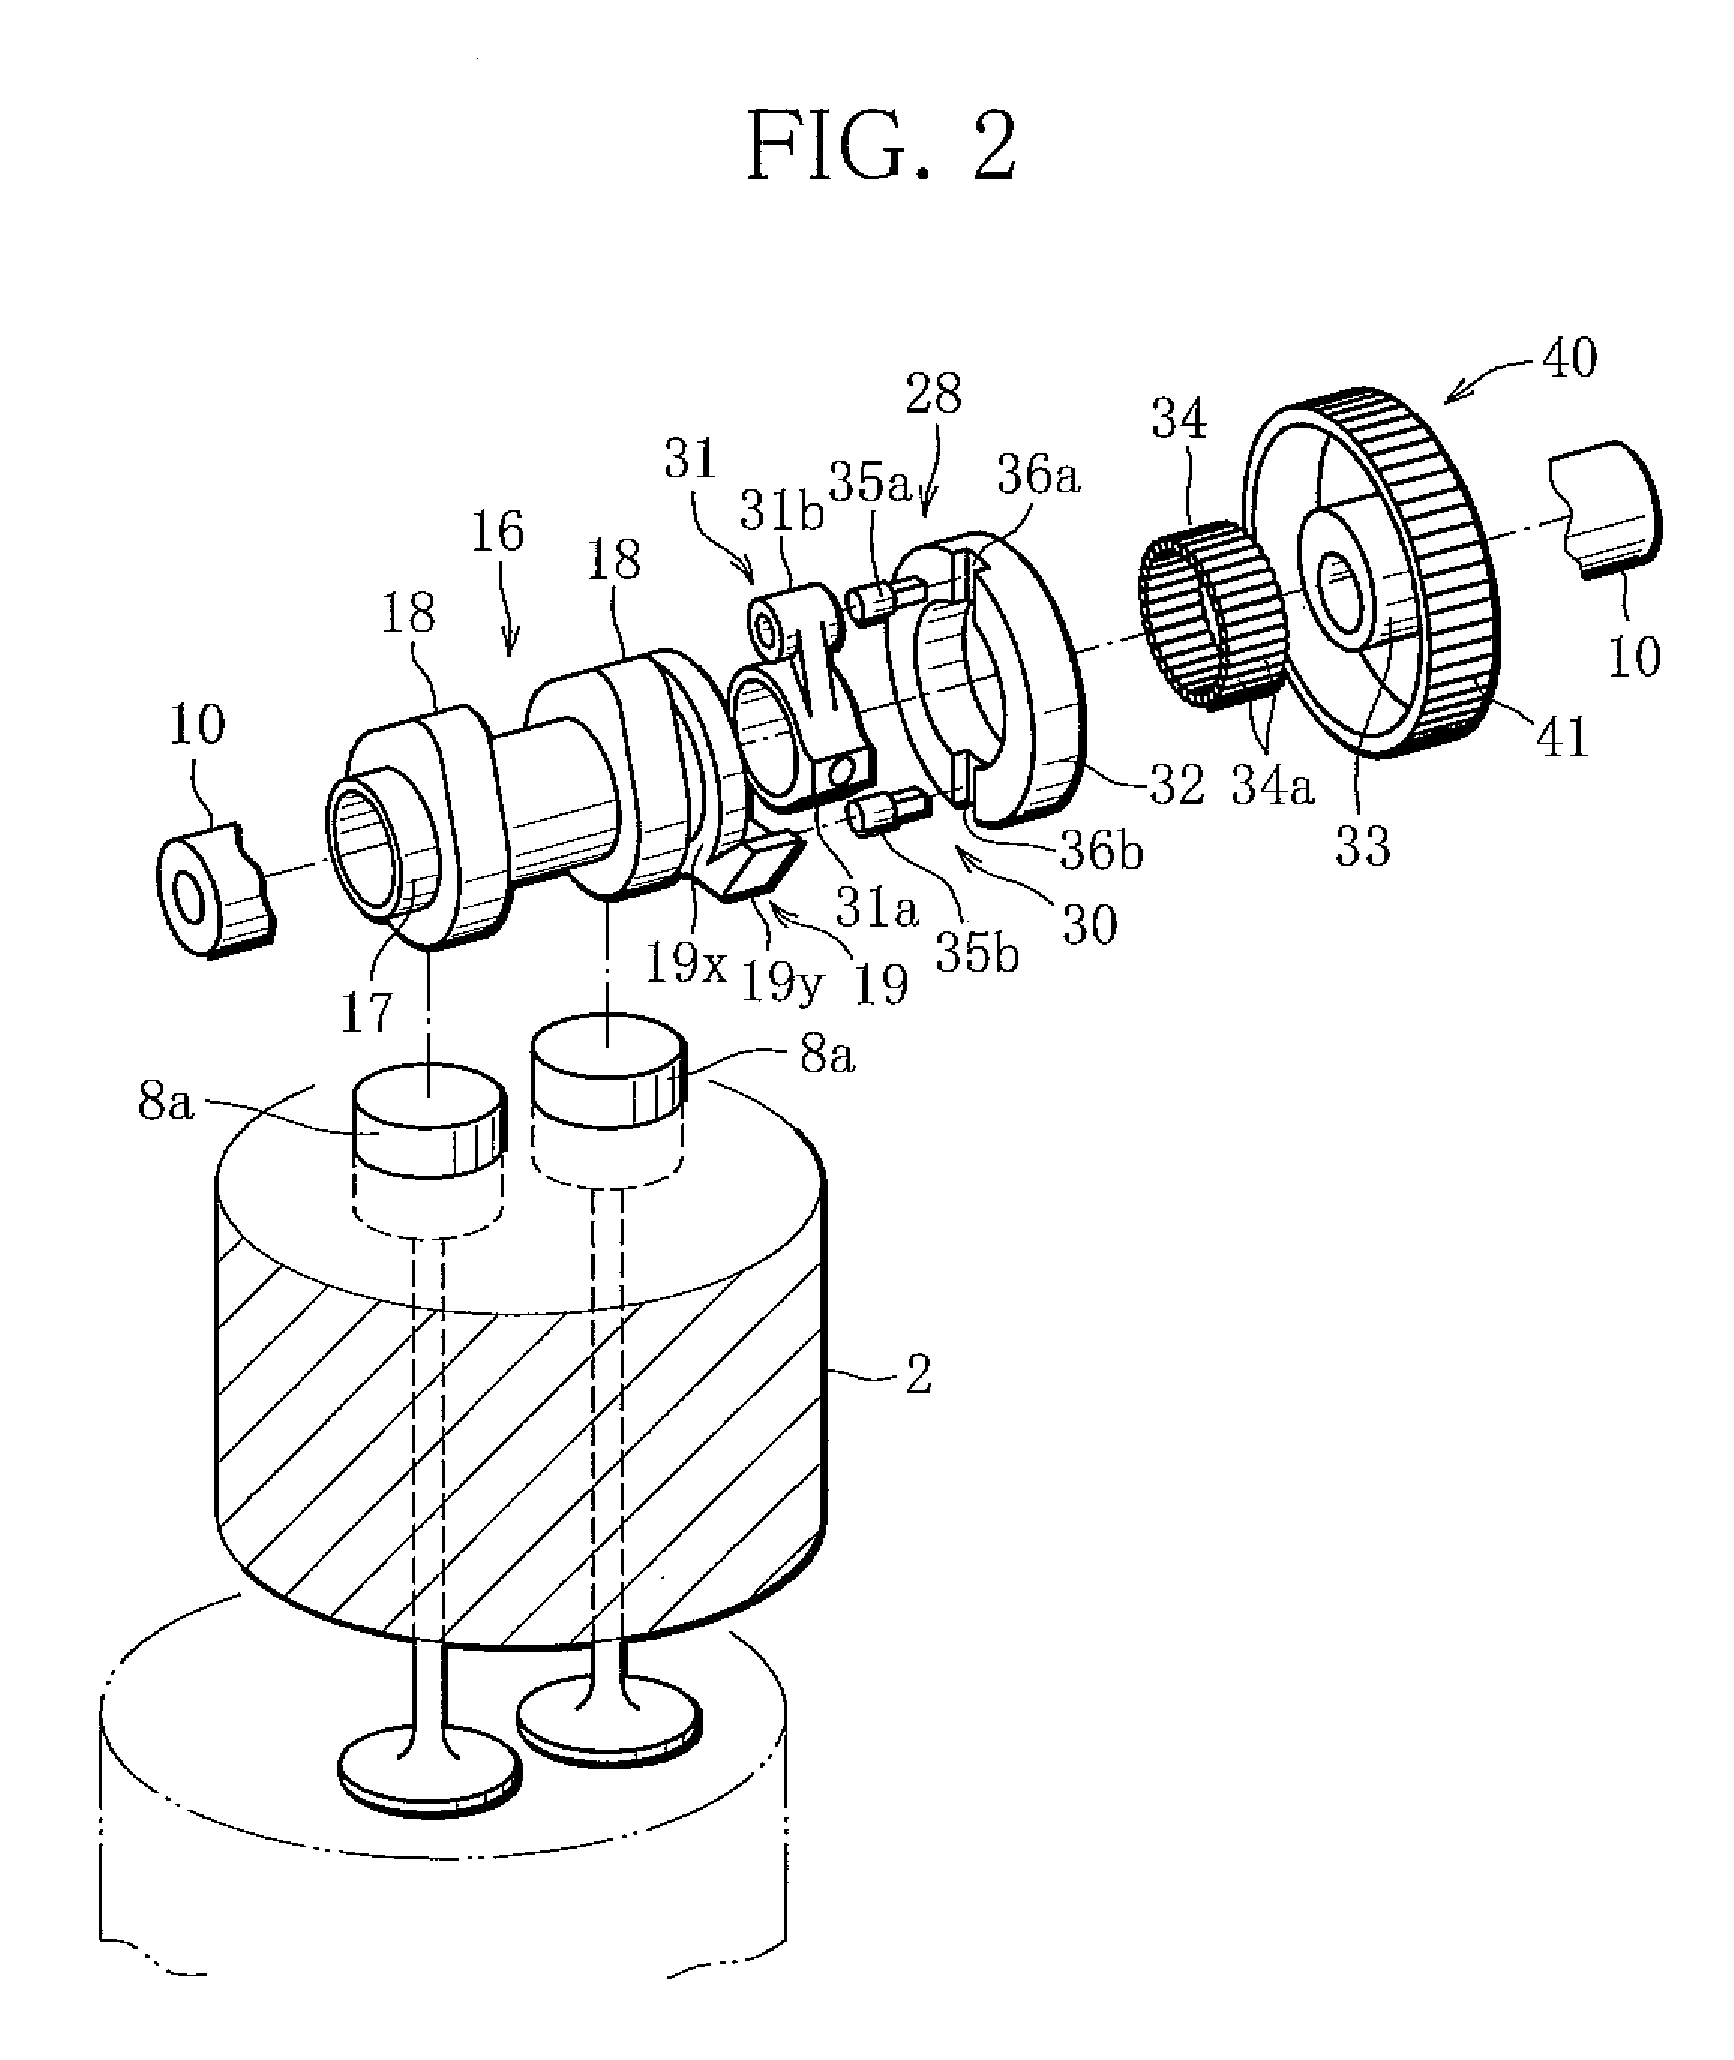 Variable valve gear for an internal combustion engine